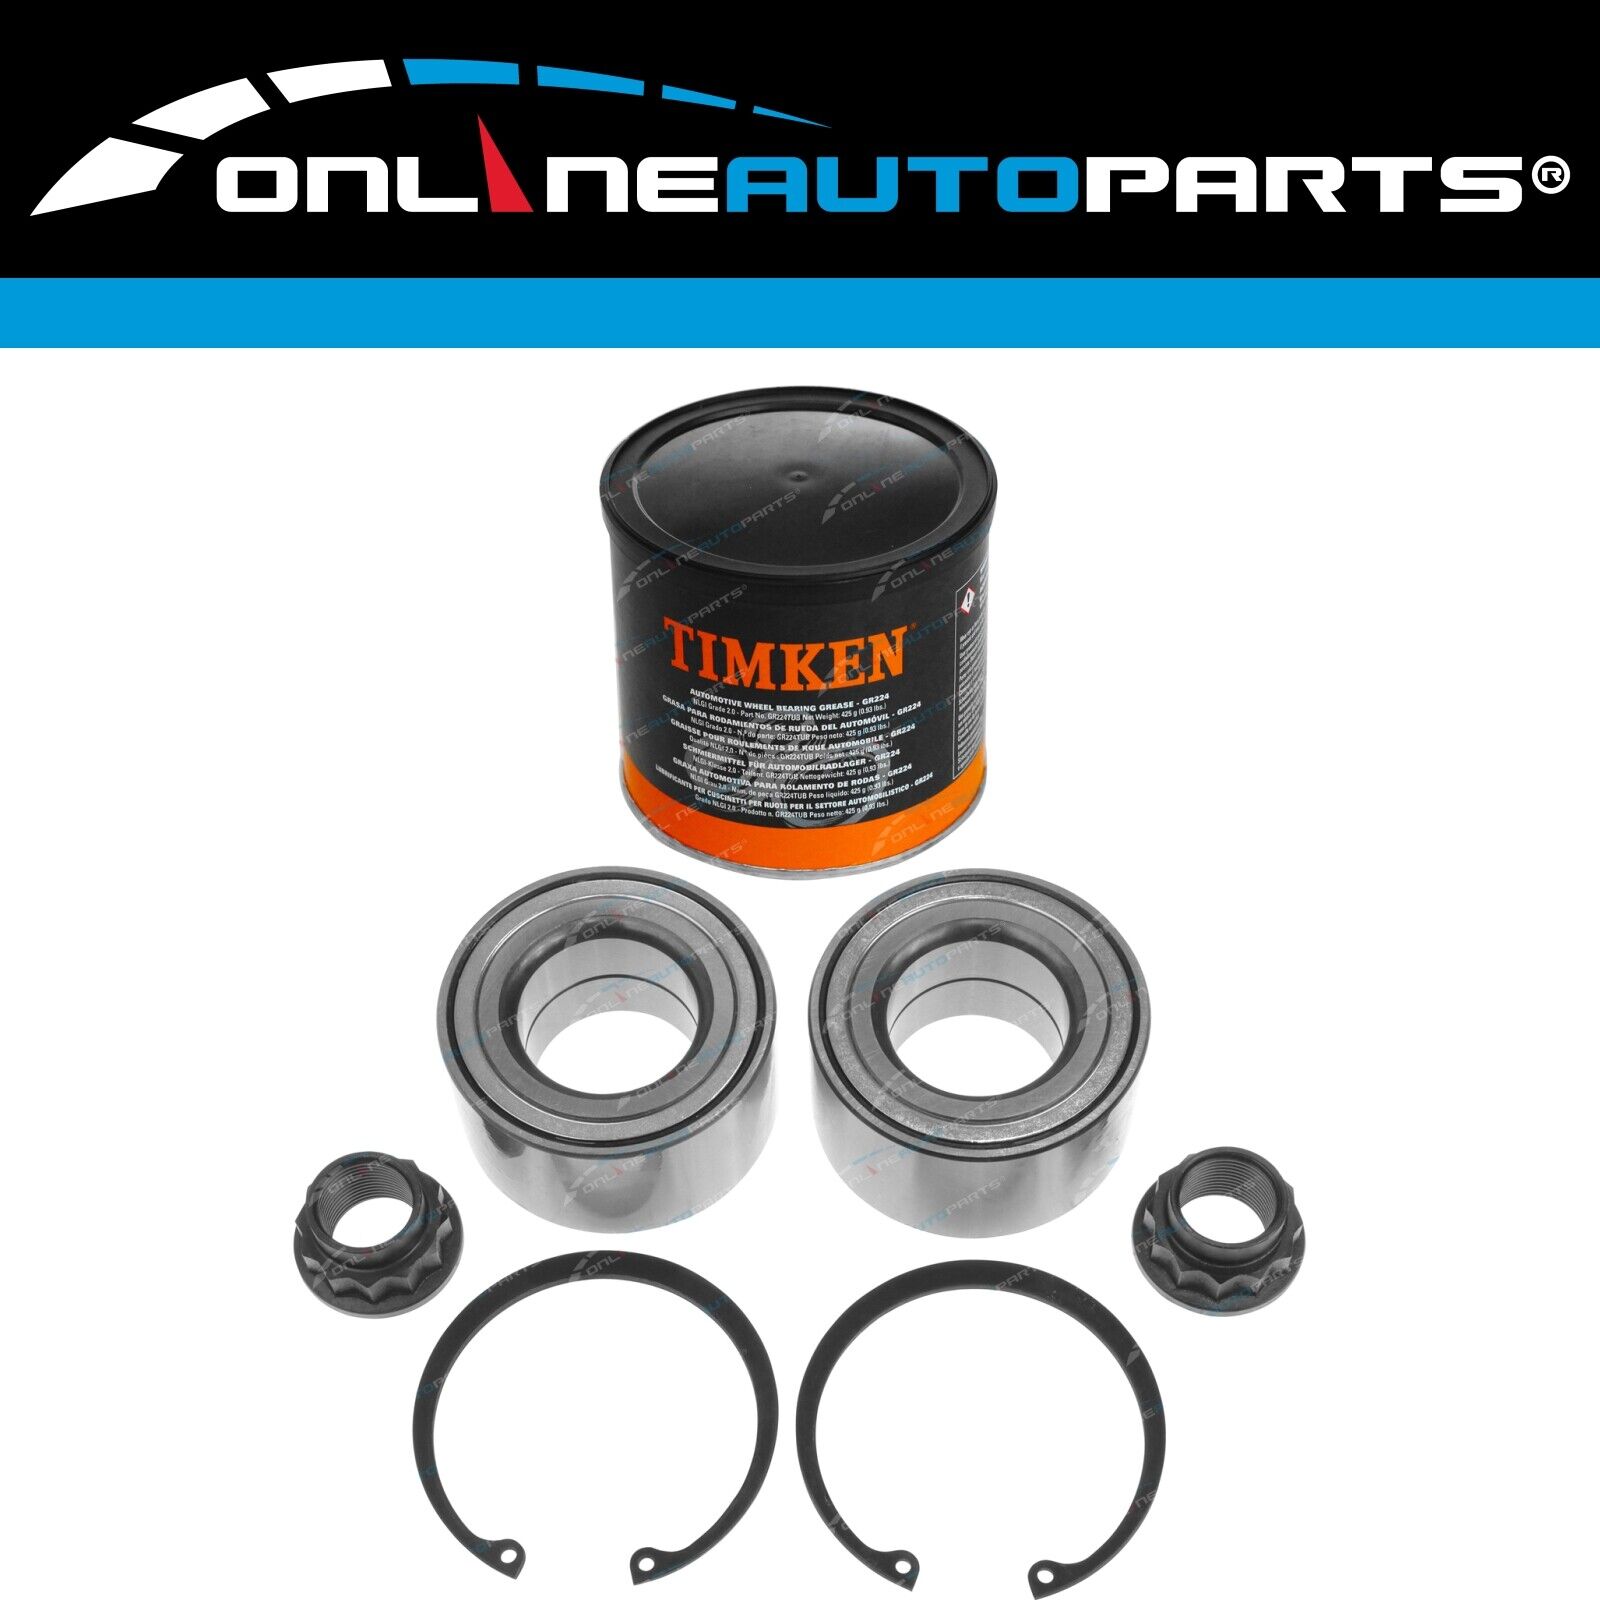 2 Front Wheel Bearing Kits + Grease for Prius C NHP10R 4cyl 1.5L 1NZ-FXE 2012~17